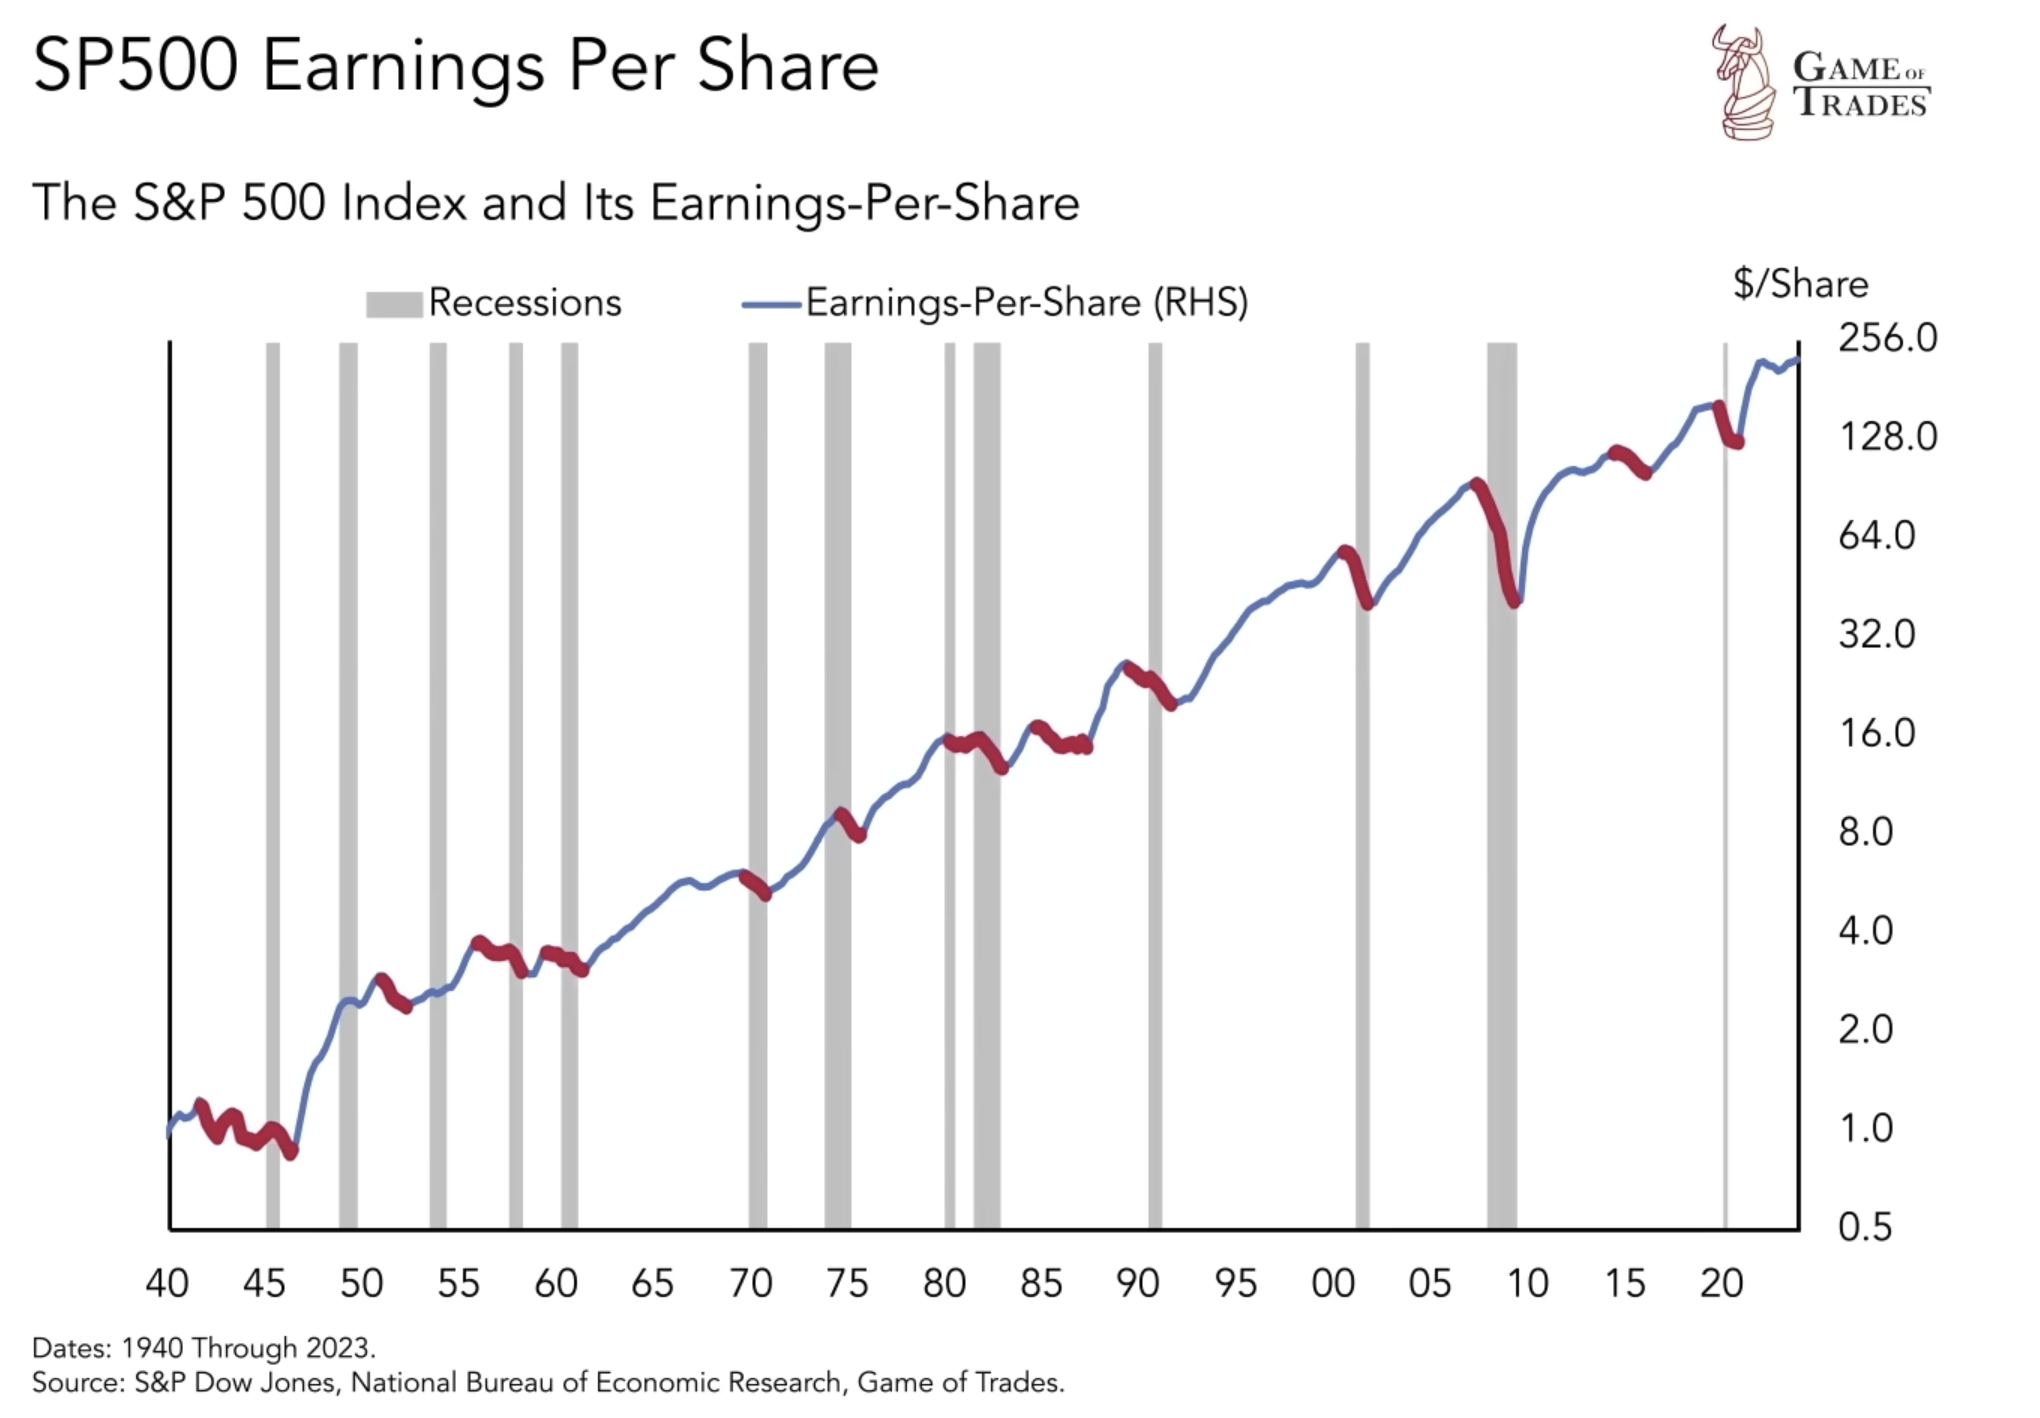 S&P 500 Index and its earnings per share